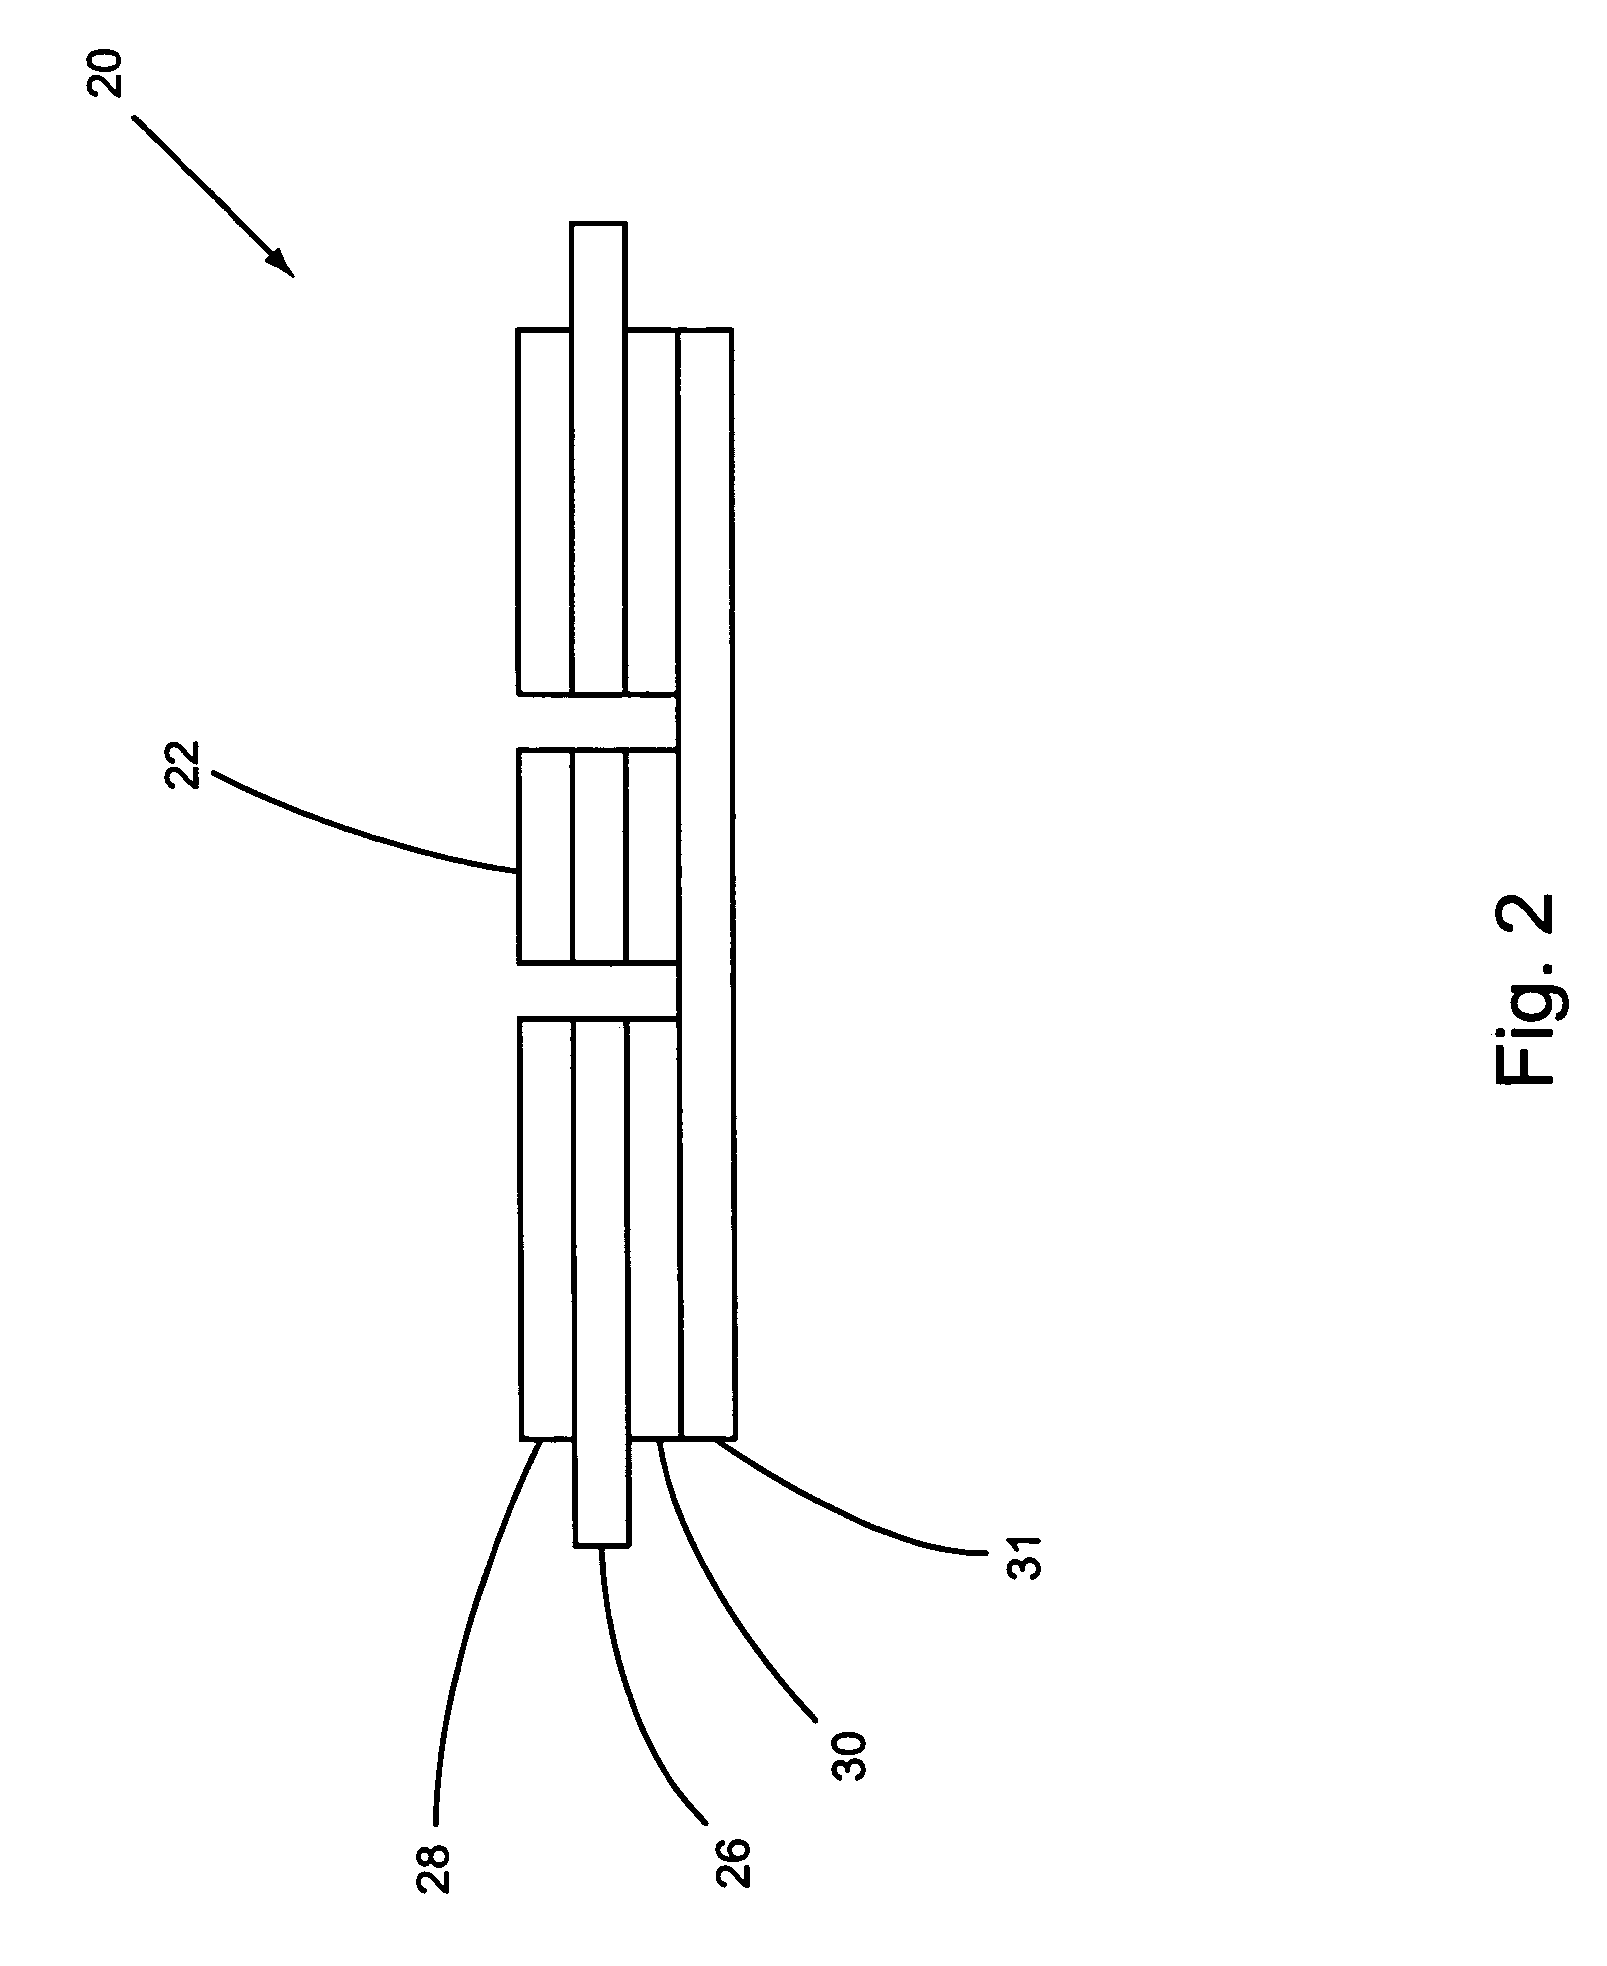 Thermal wristband/cinch with inboard label assembly business form and method